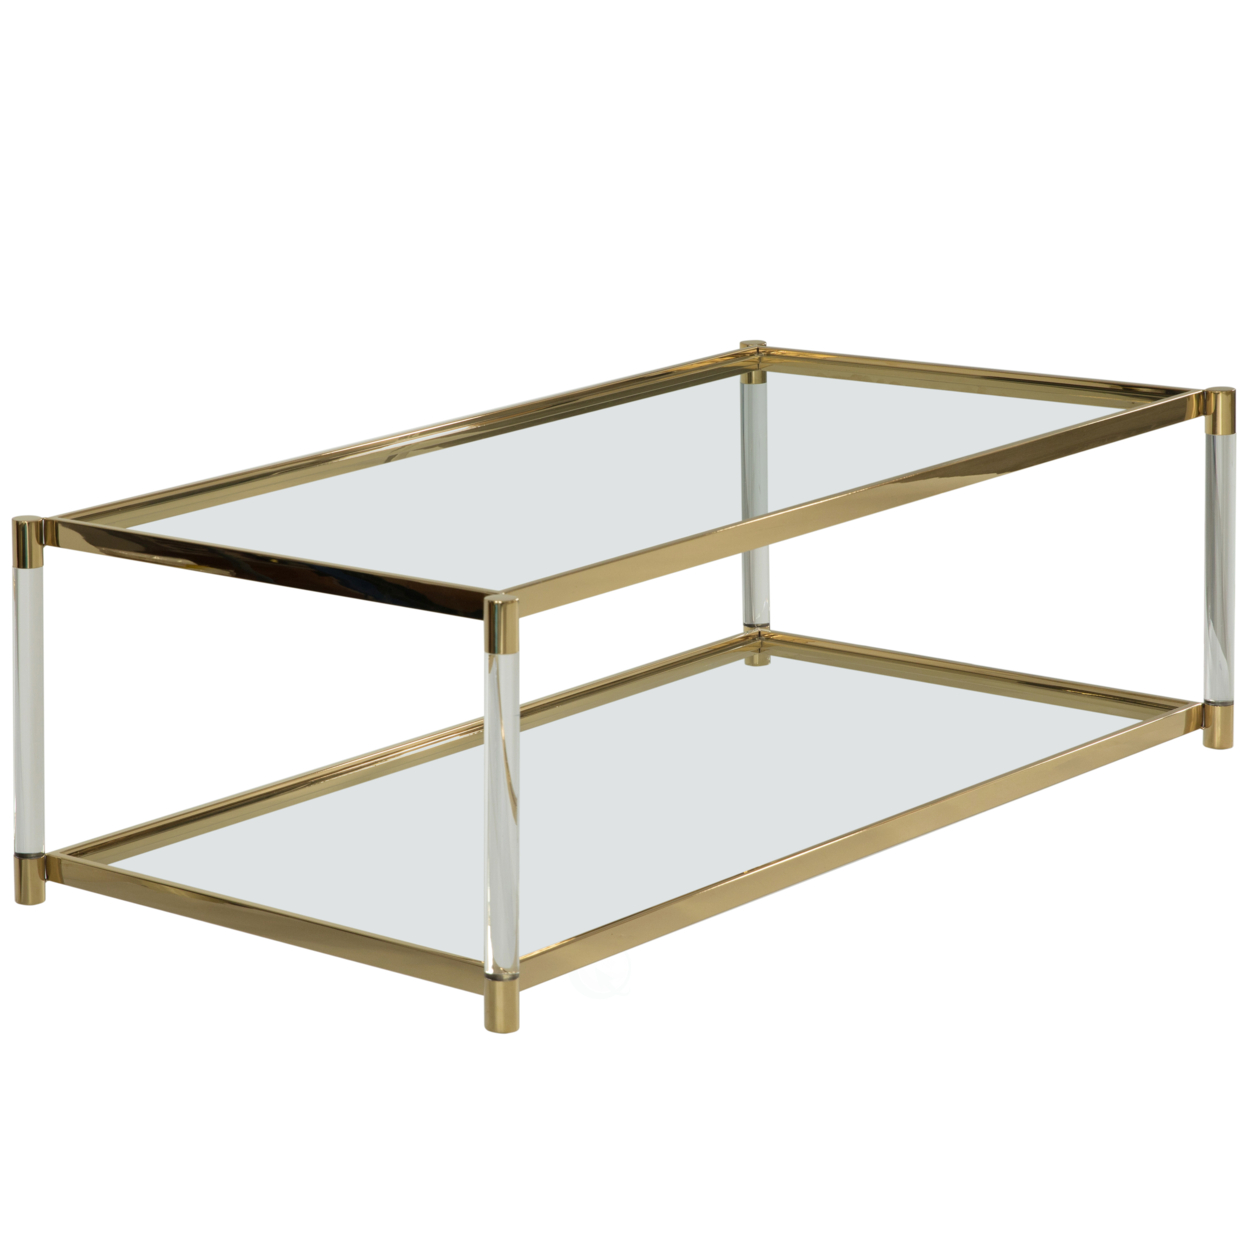 Acrylic Rectangular Modern Gold Metal Coffee Table with Tempered Glass and Shelf for Office, Dining Room, Entryway